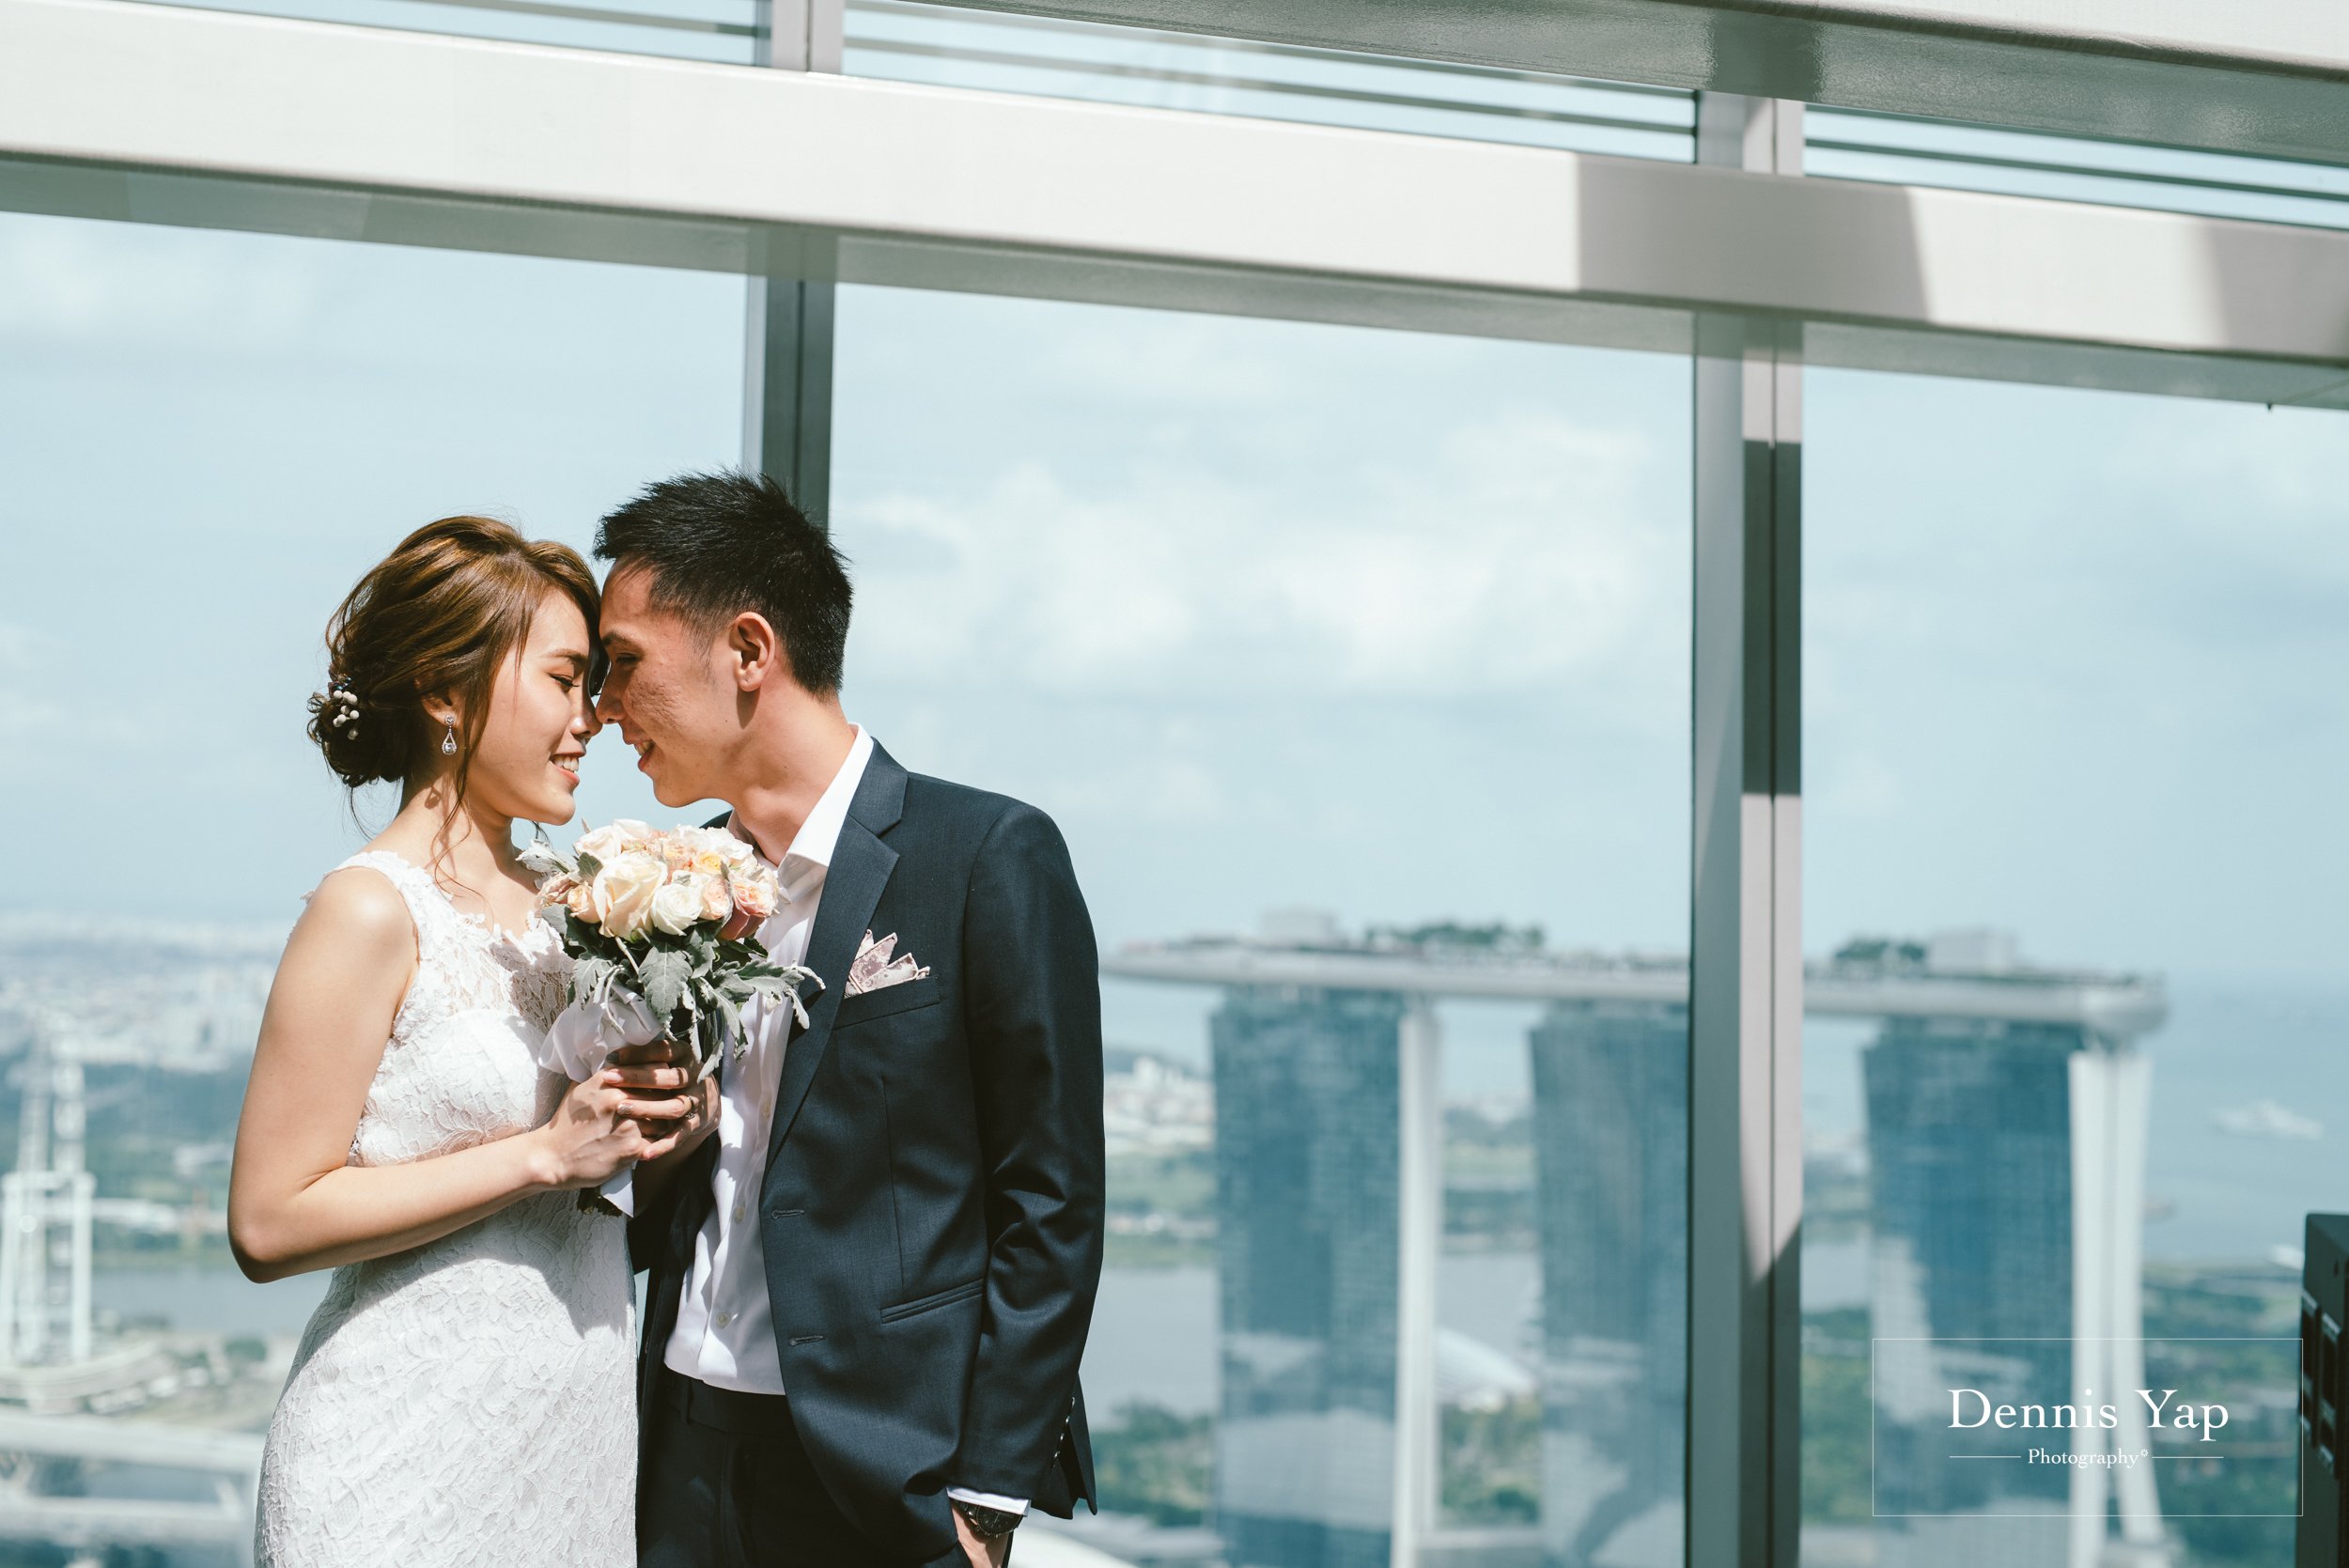 clarence kerlyn registration of marriage in zafferano singapore dennis yap photography malaysia top wedding photographer-18.jpg